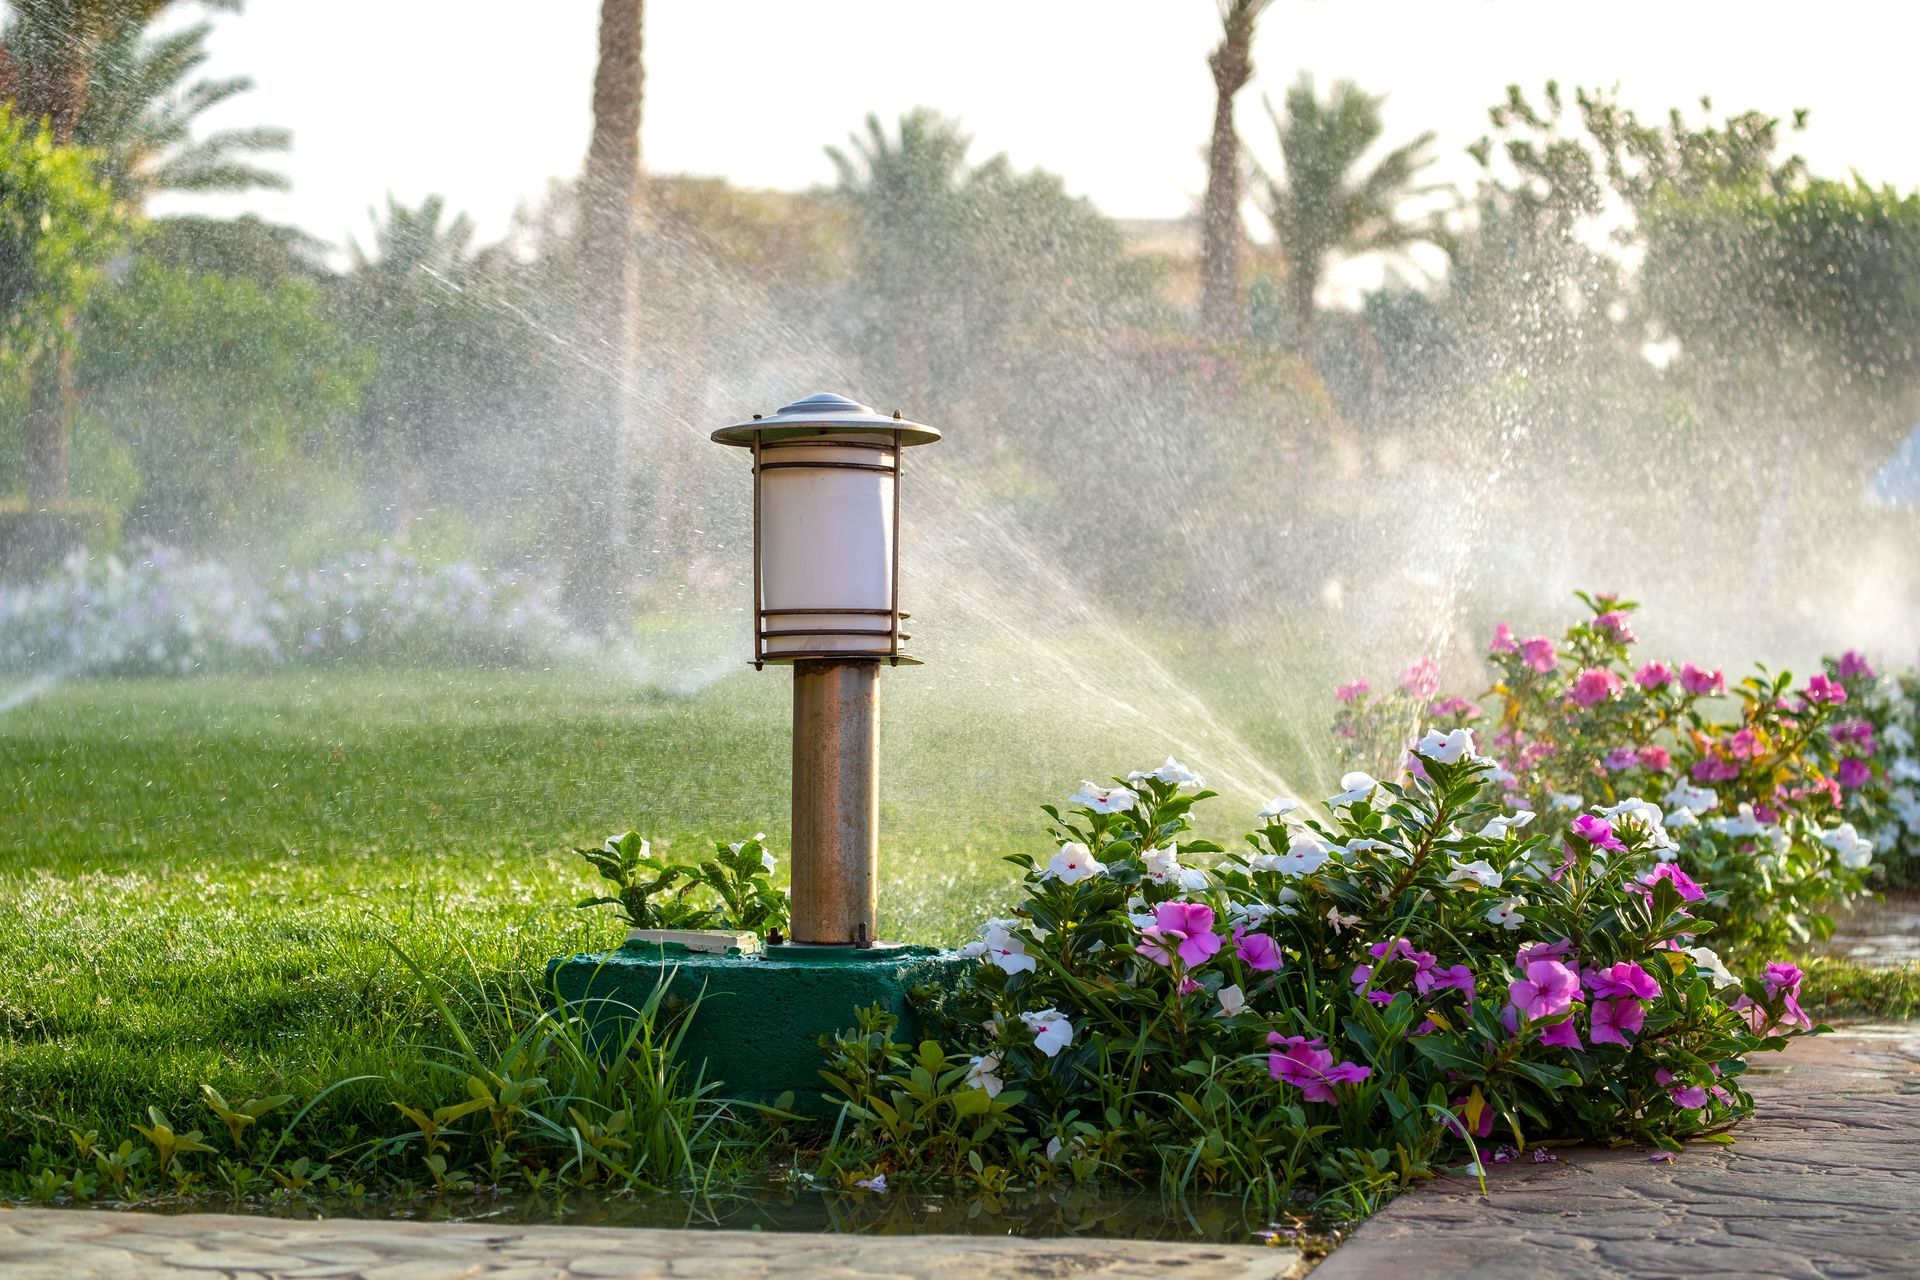 A lamp post is surrounded by flowers and sprinklers in a garden.